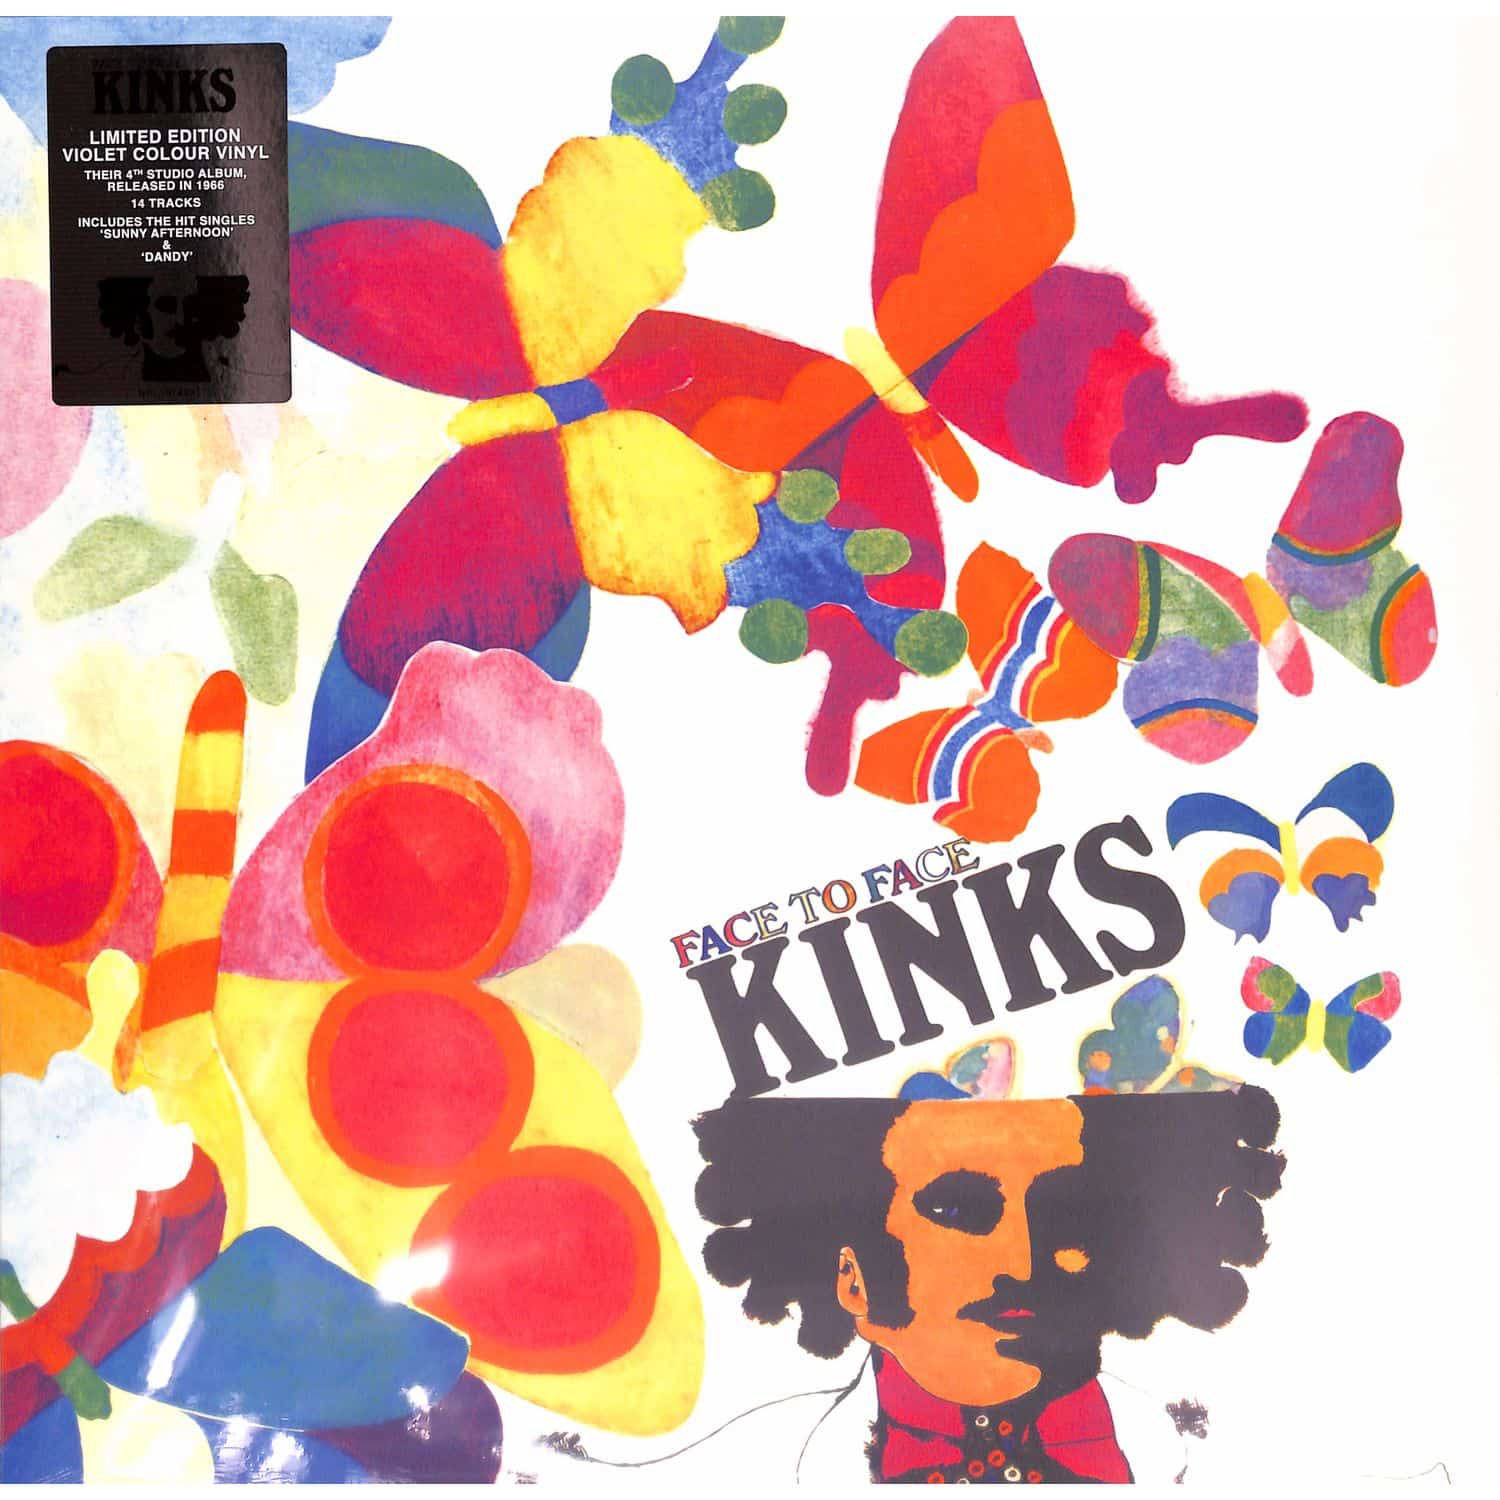 The Kinks - FACE TO FACE 